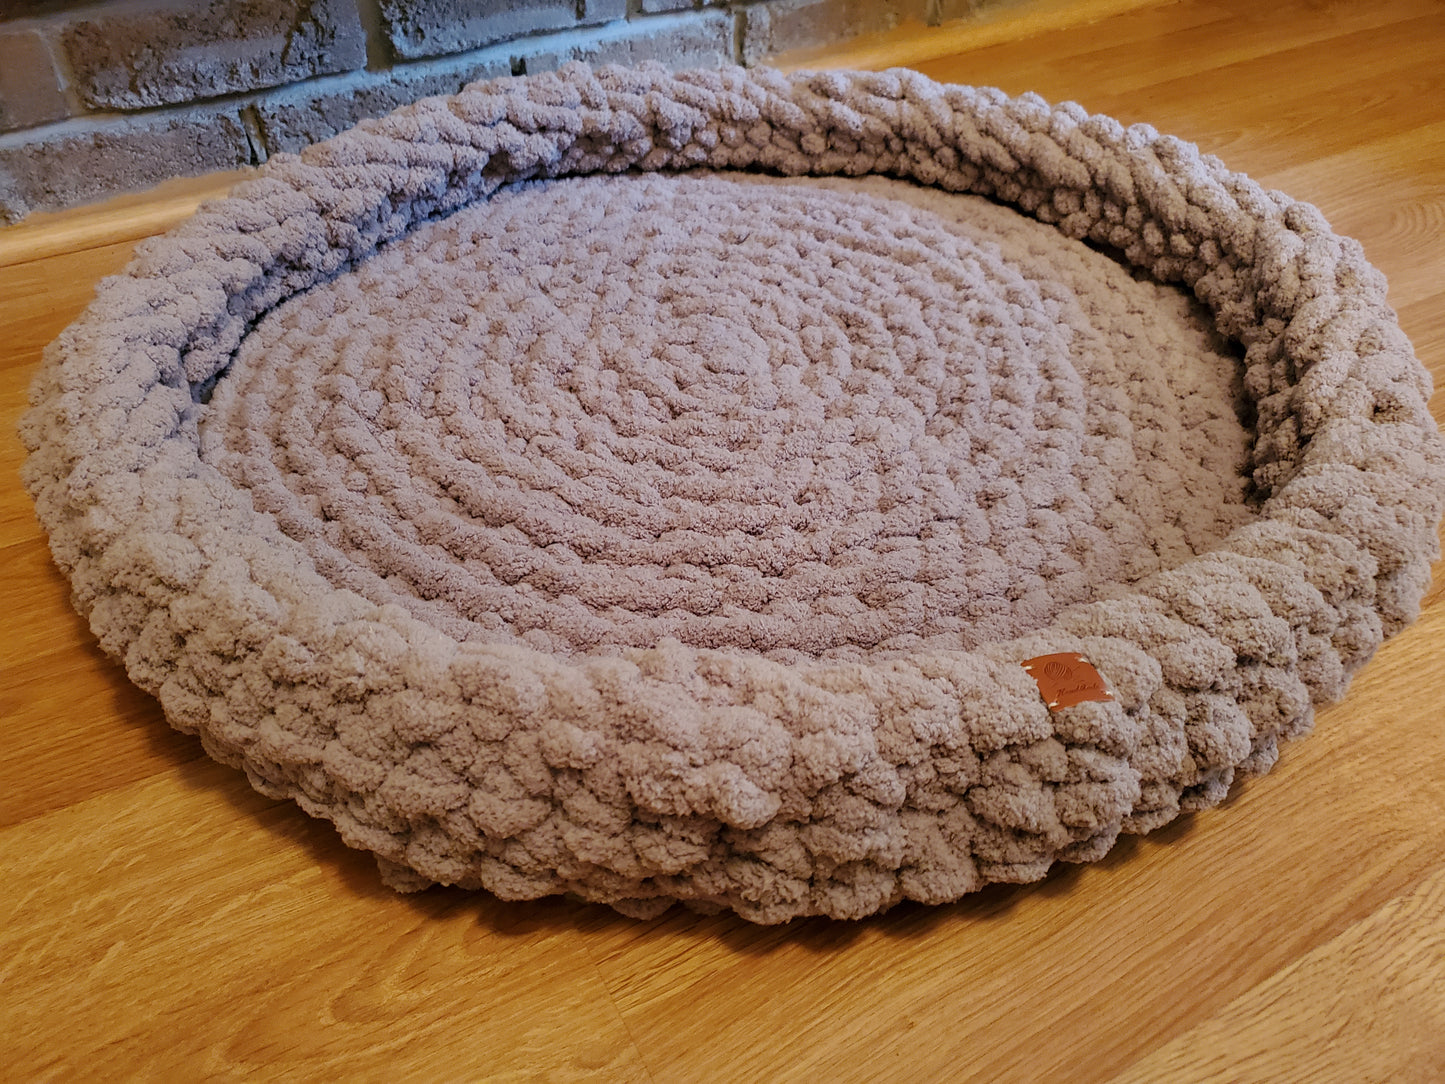 42" Dog Bed | XL Size Chenille Wool Pet Bed